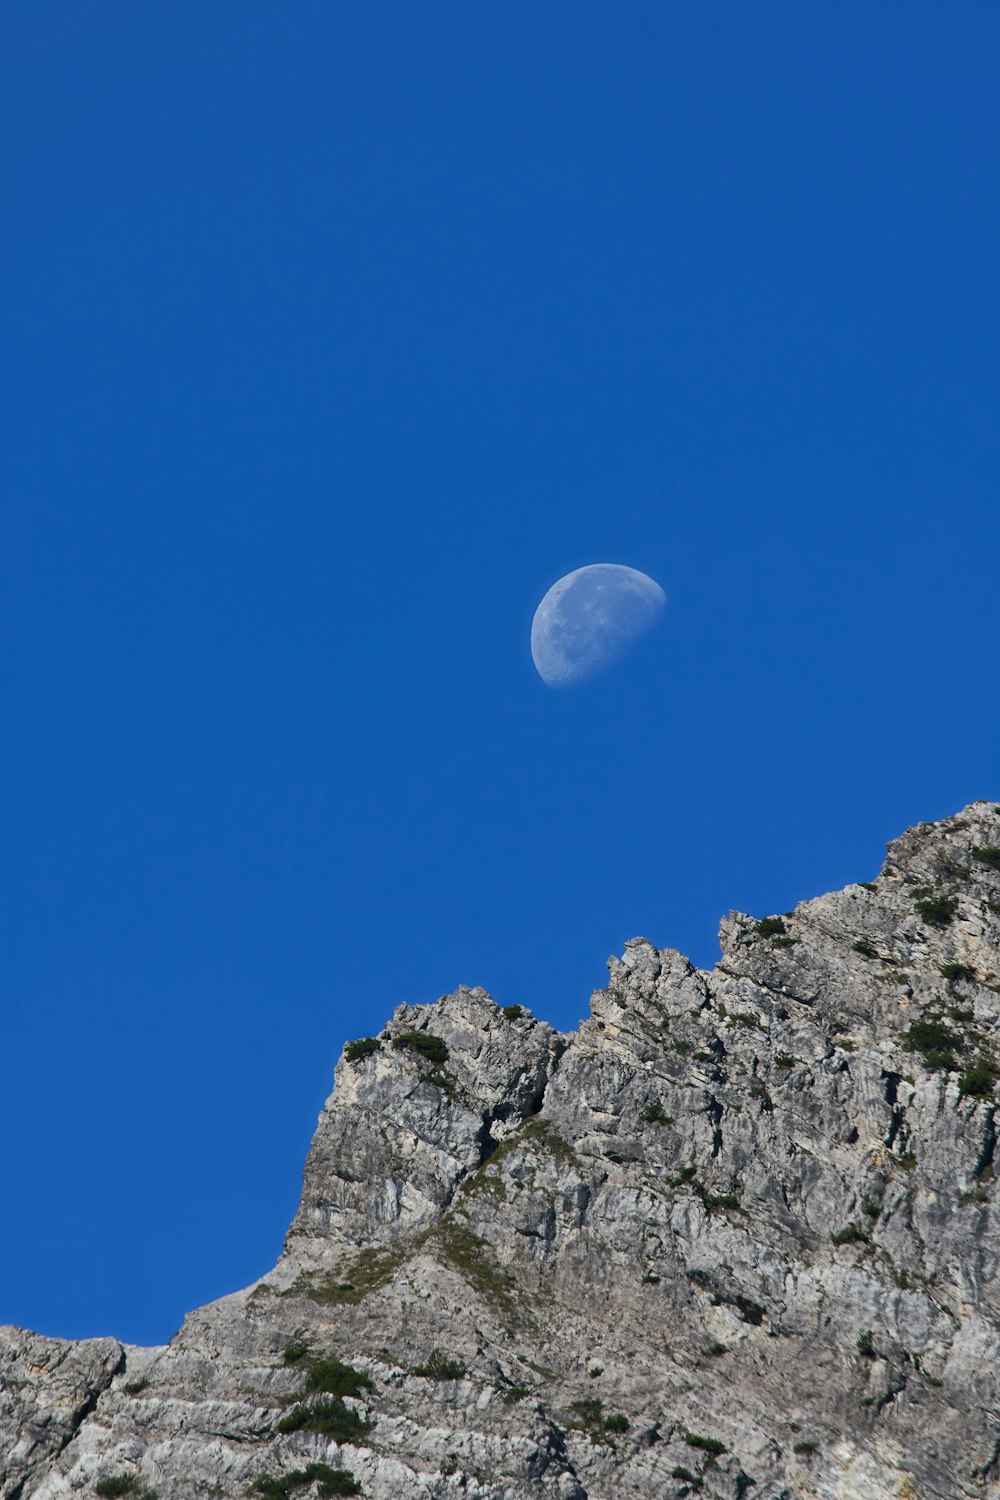 the moon is visible in the blue sky above a mountain